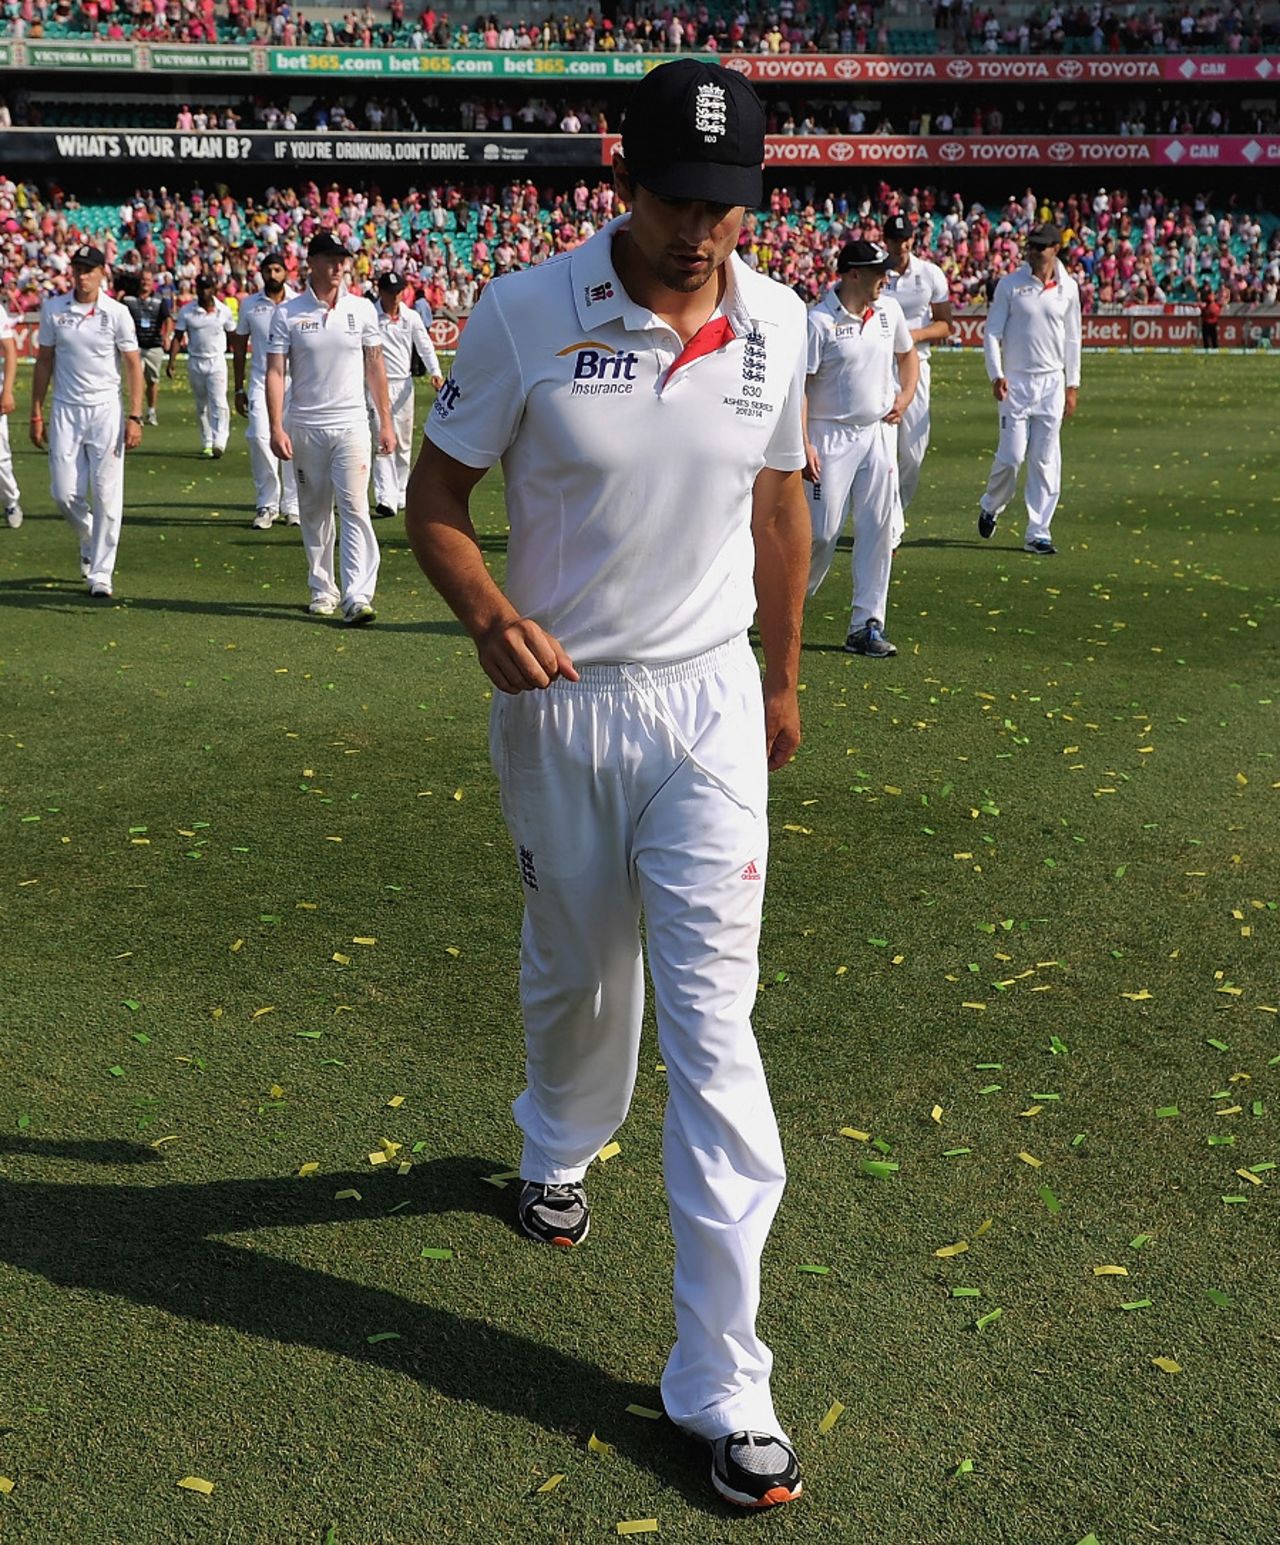 A dejected Alastair Cook leads his team around the outfield, Australia v England, 5th Test, Sydney, 3rd day, January 5, 2014